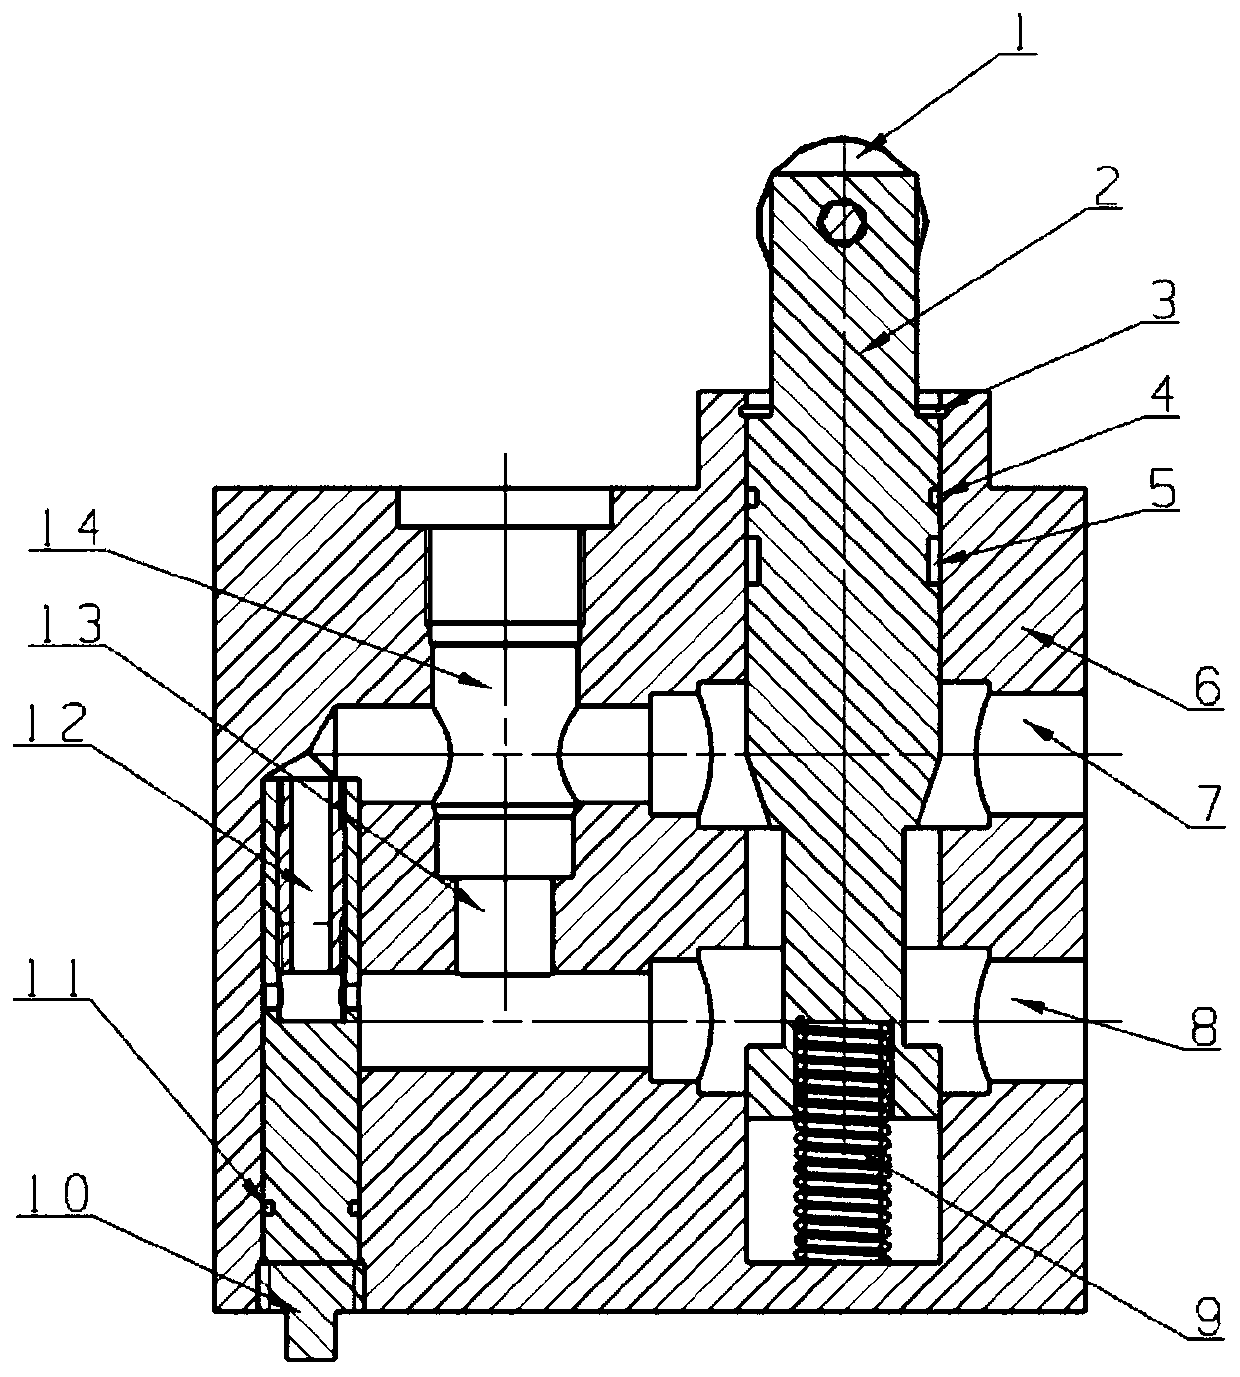 Mechanical throttling governing valve with adjustable damping hole